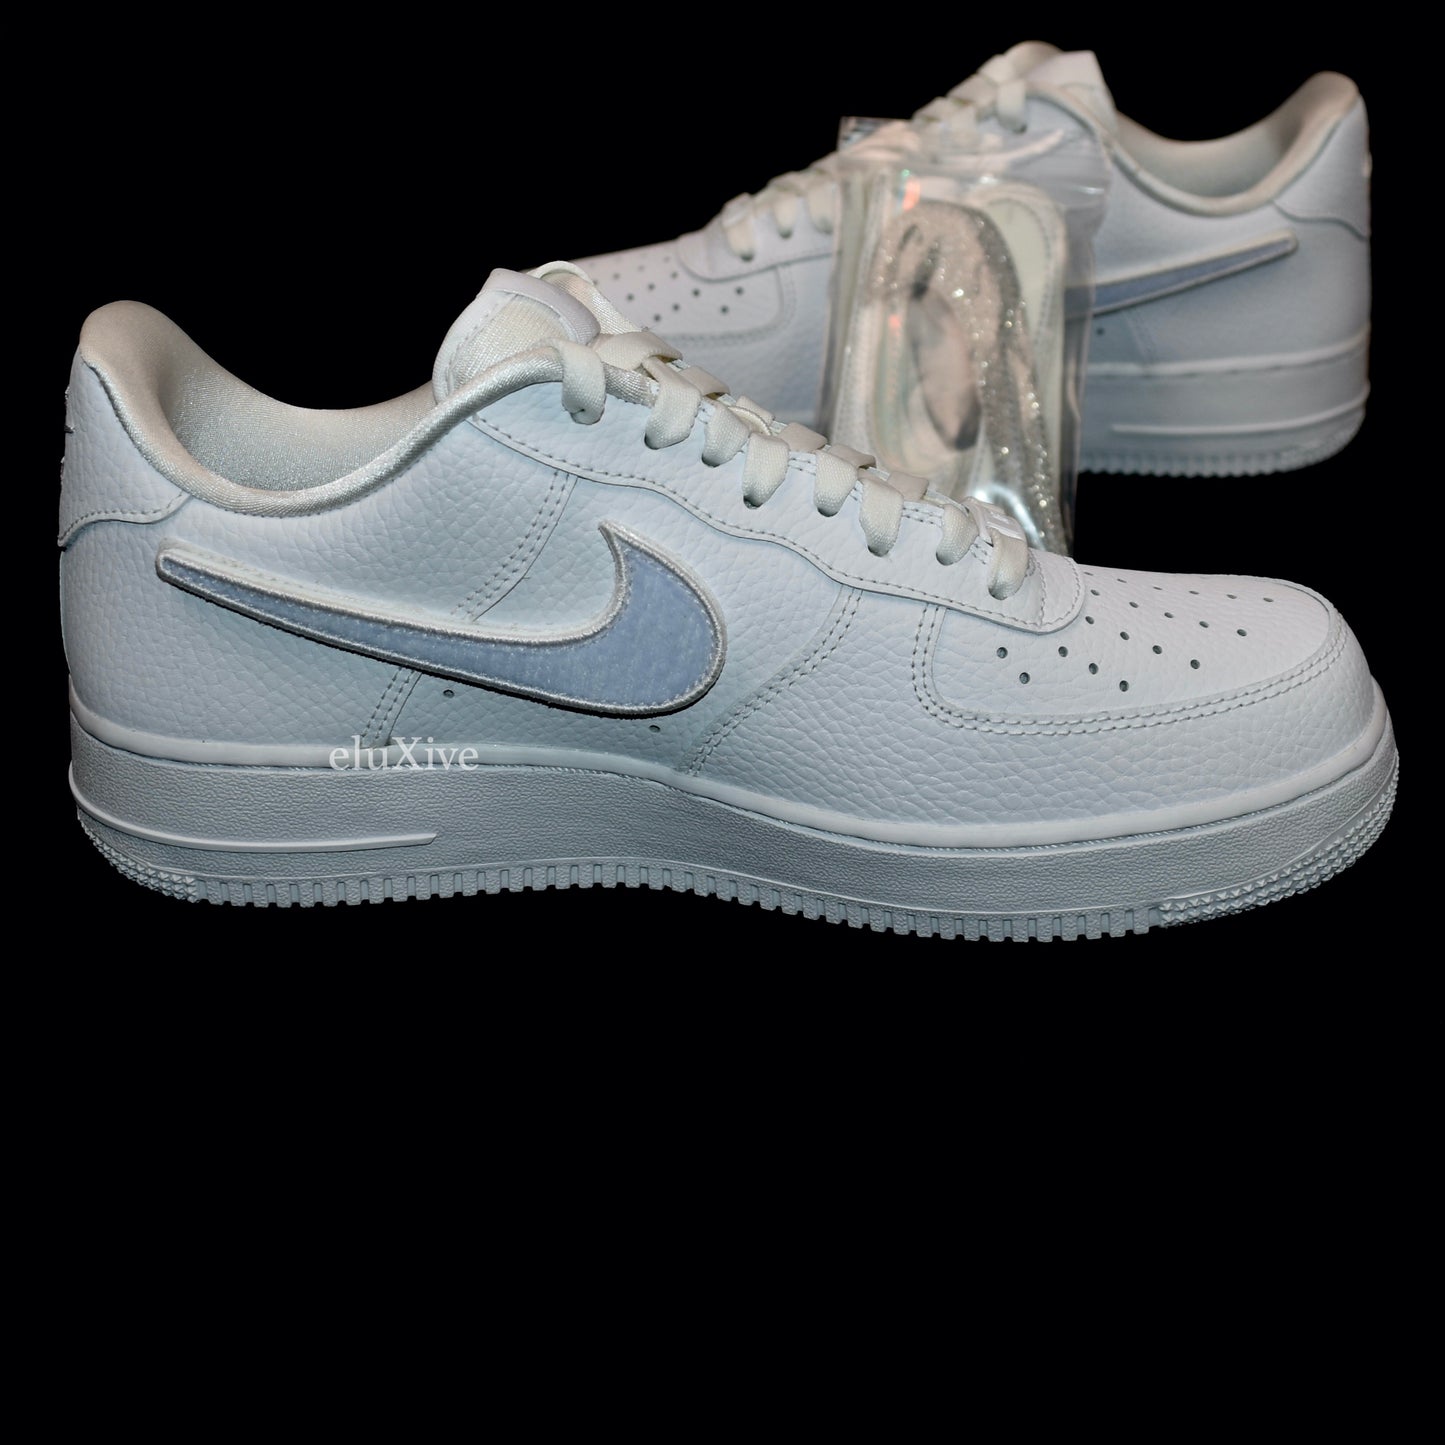 Nike - Air Force 1-100 Velcro Swoosh / Pebbled Leather (White)